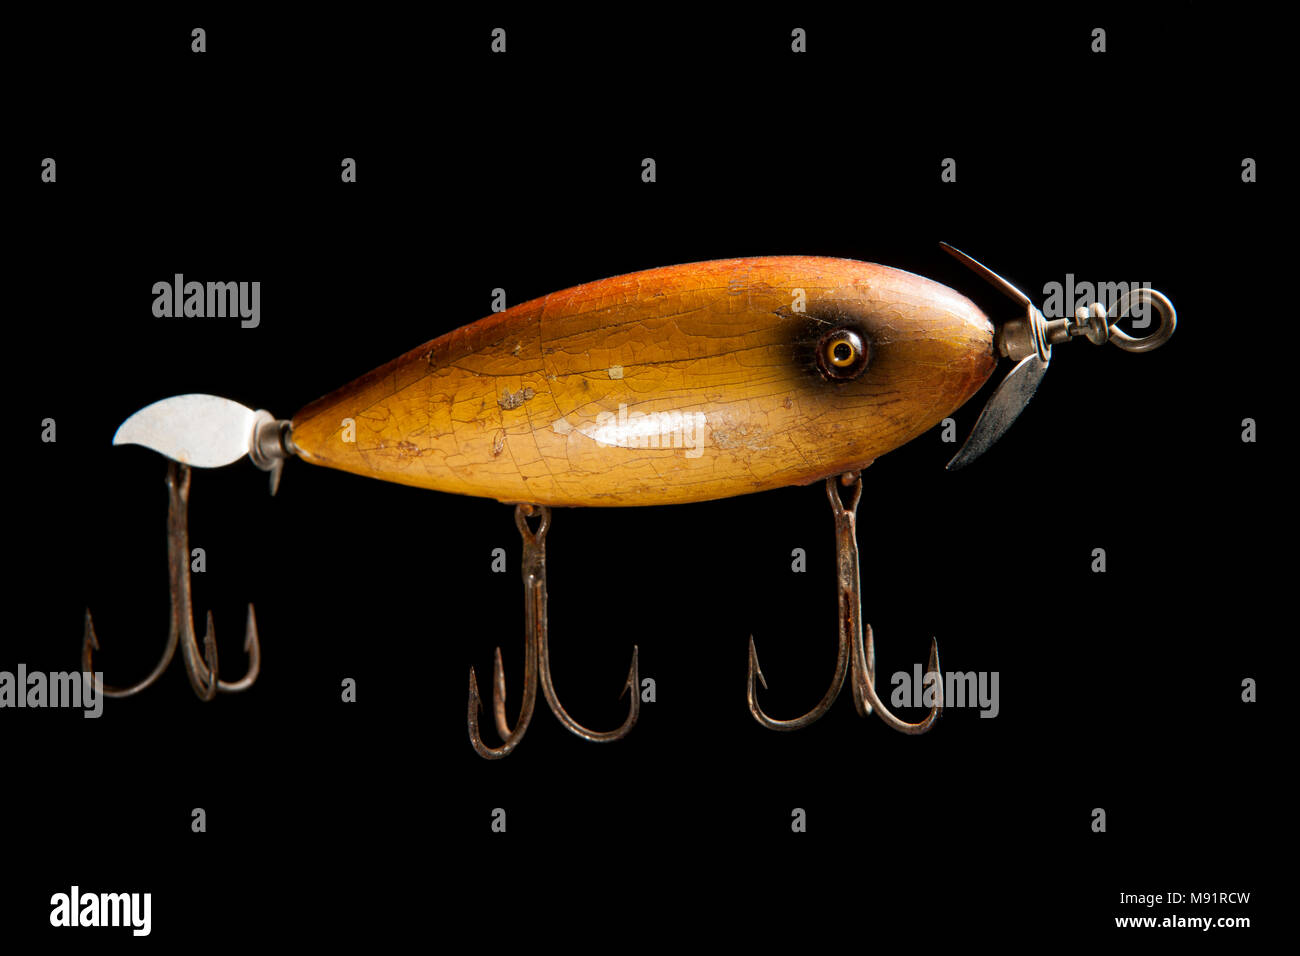 Old fishing lure or plug by South Bend, on a black background